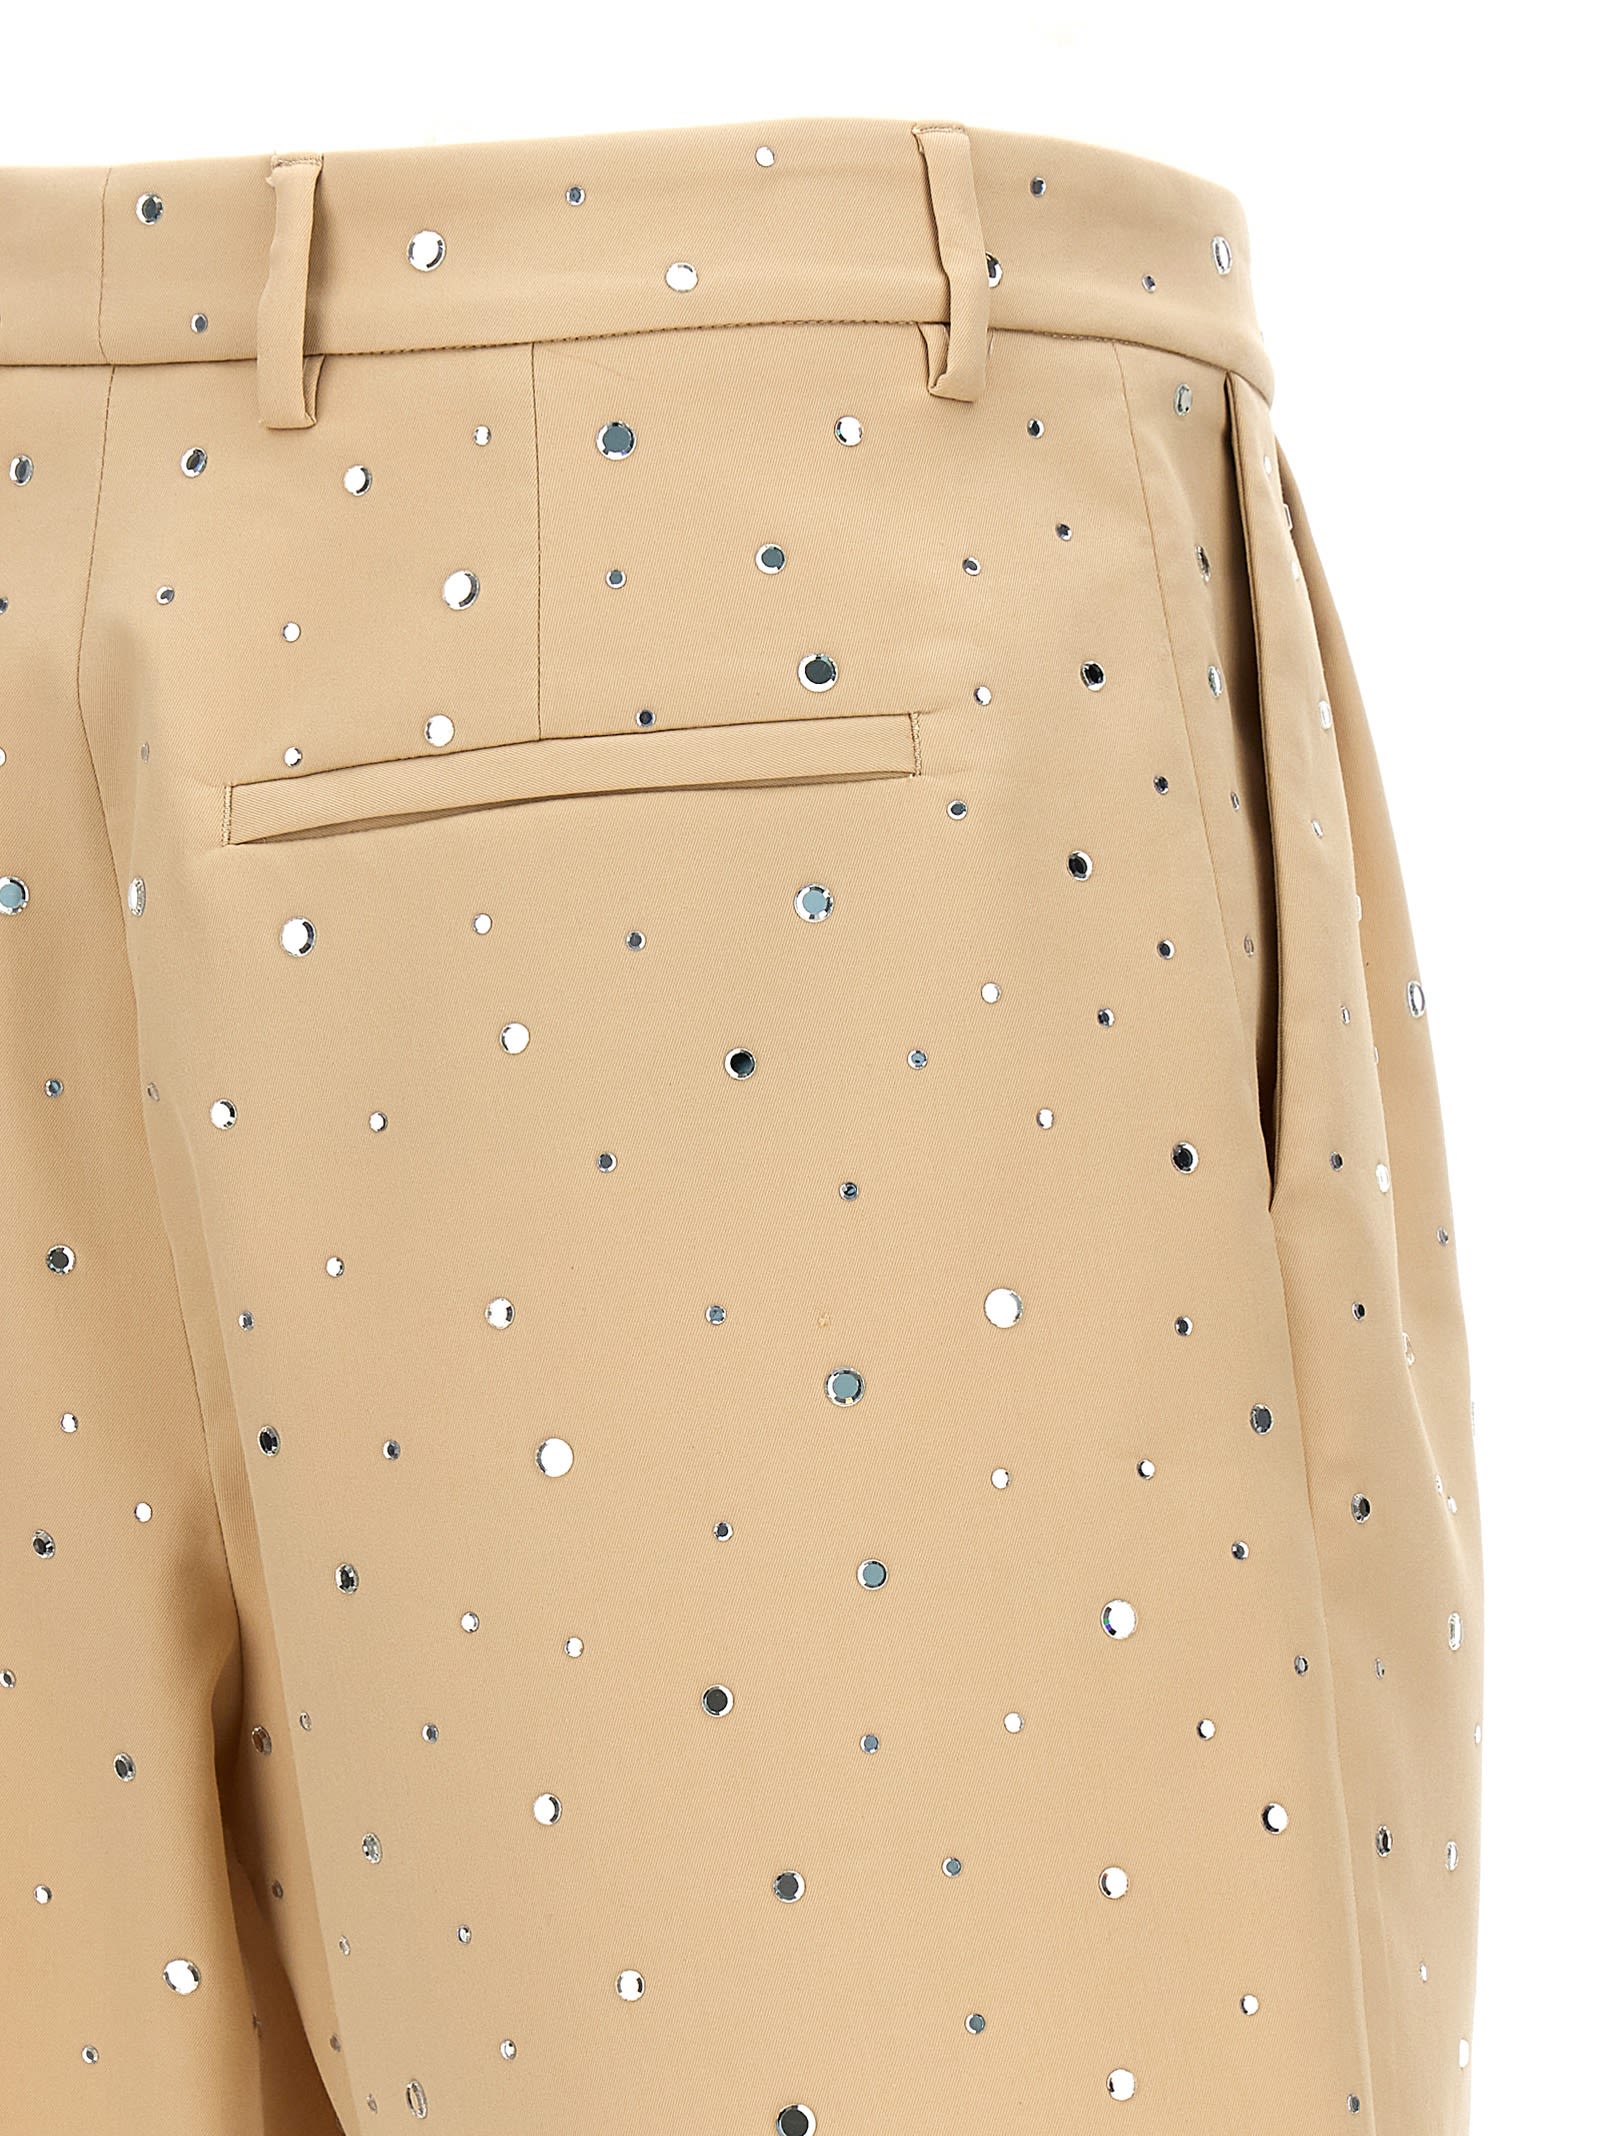 Shop Giuseppe Di Morabito All-over Crystal Shorts In Beige